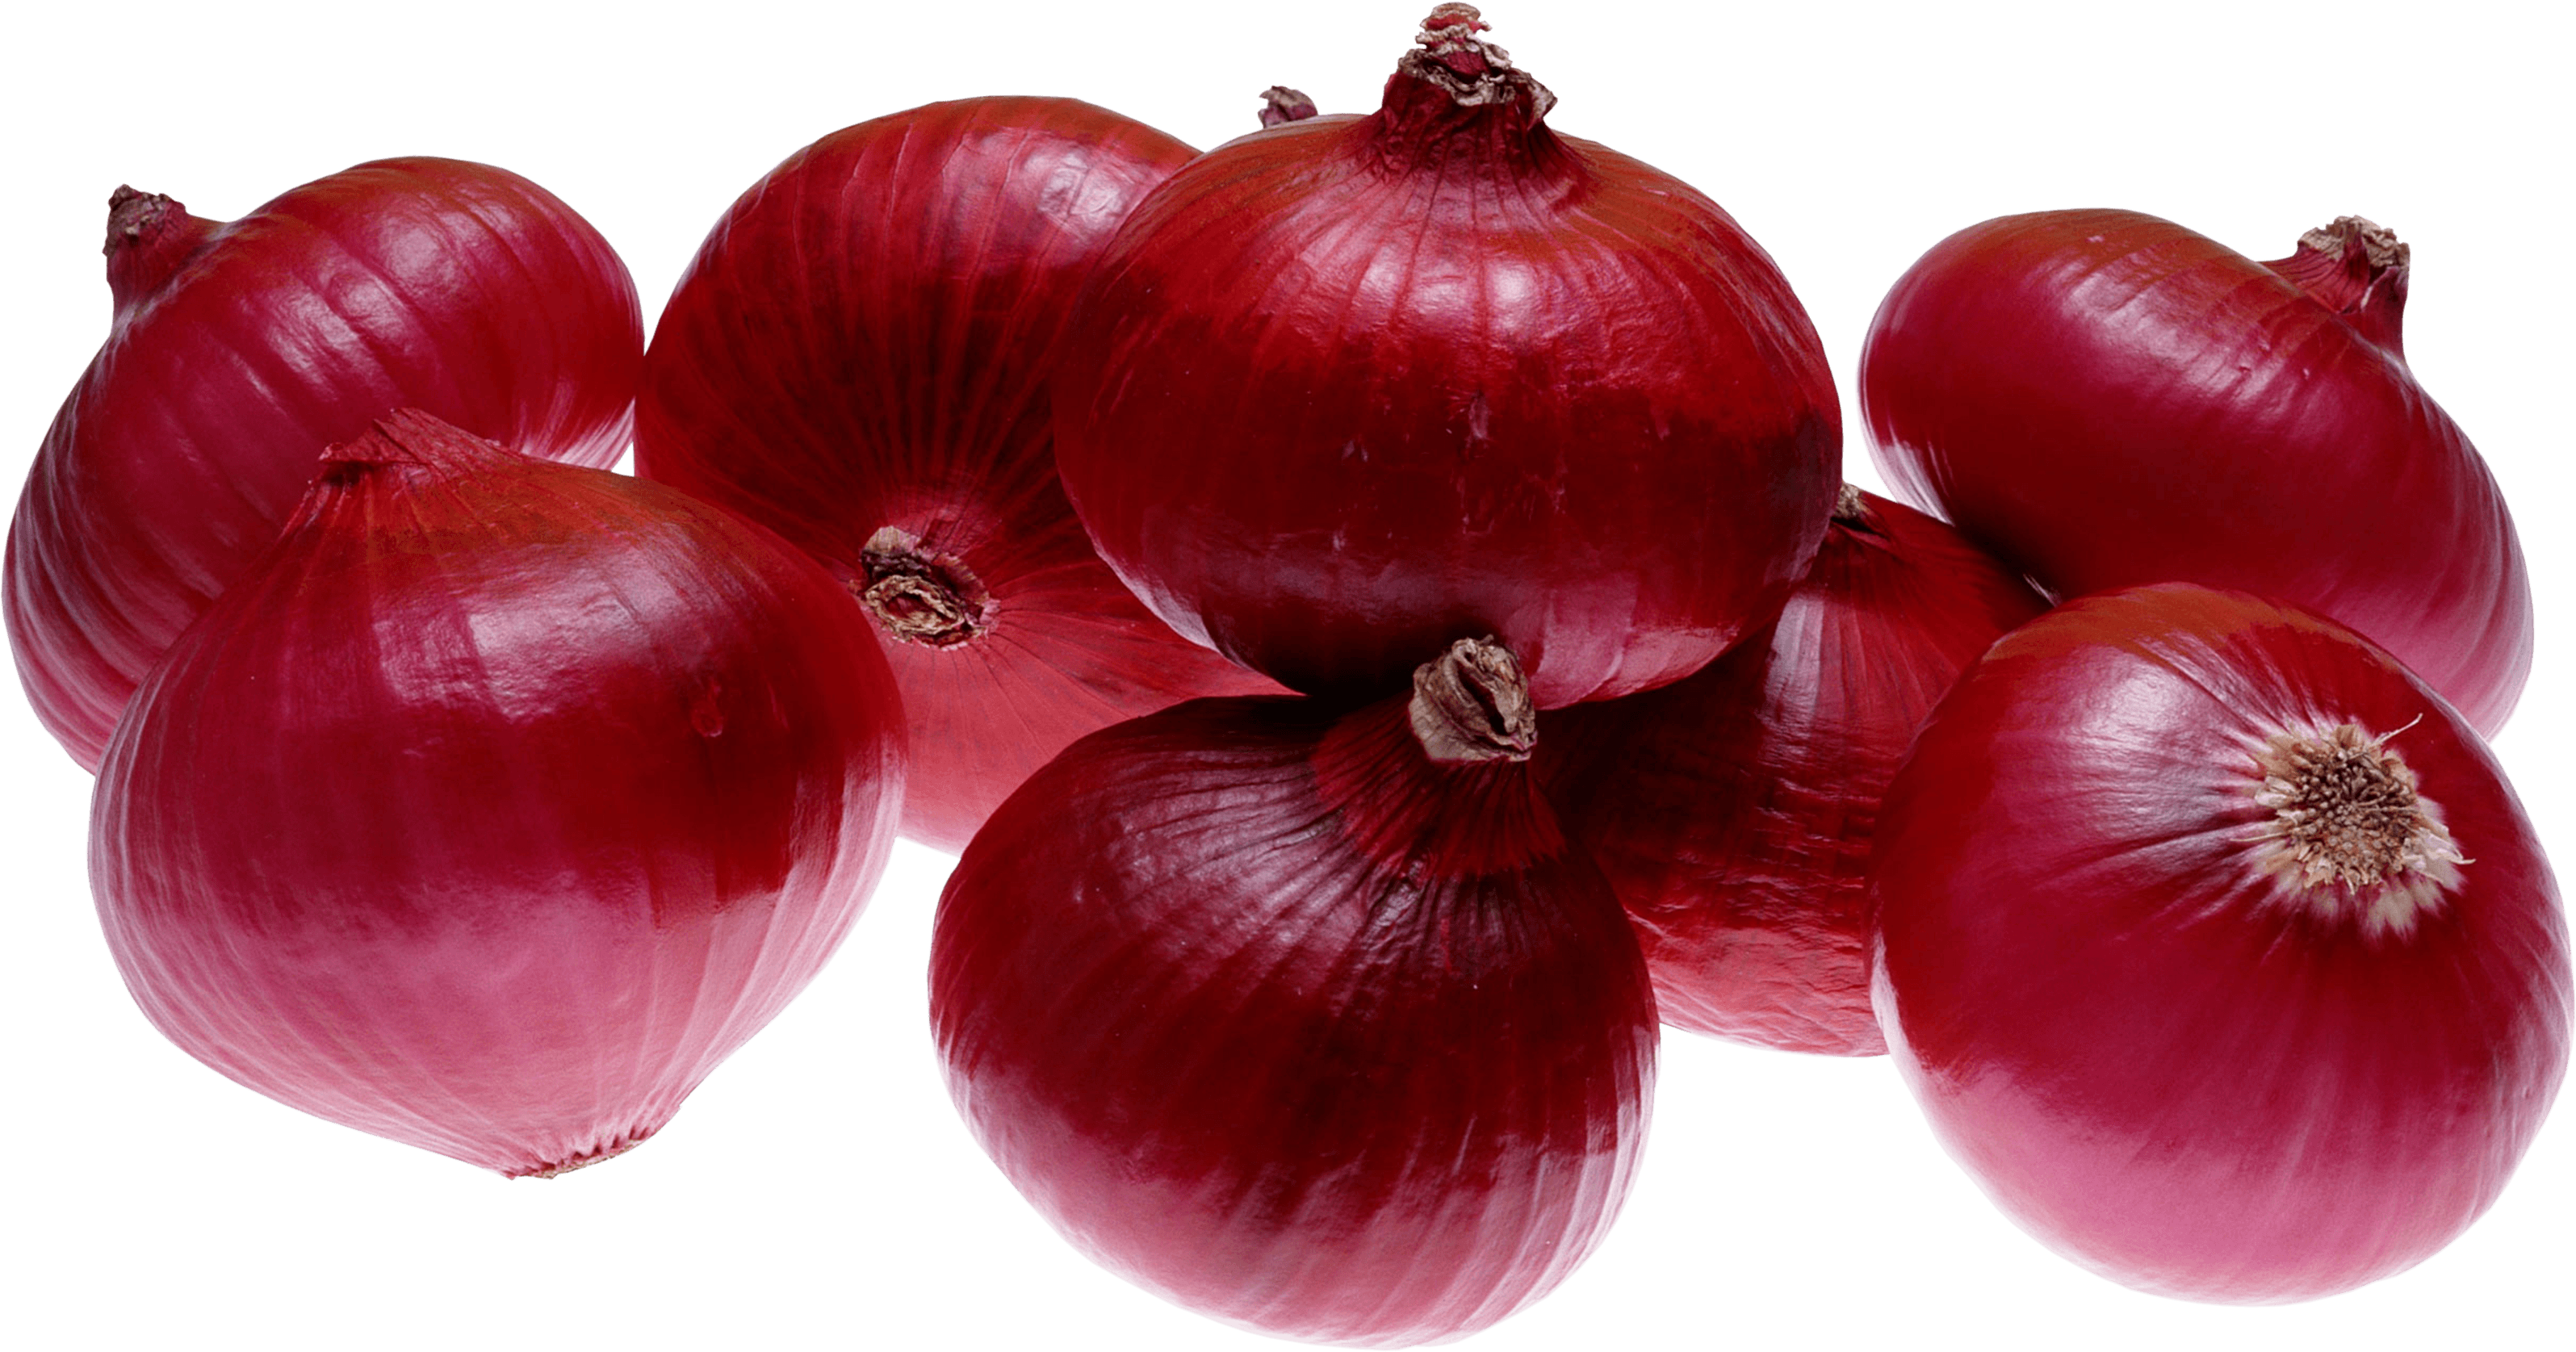 Onion Wallpaper, Onion Wallpaper and Picture Collection